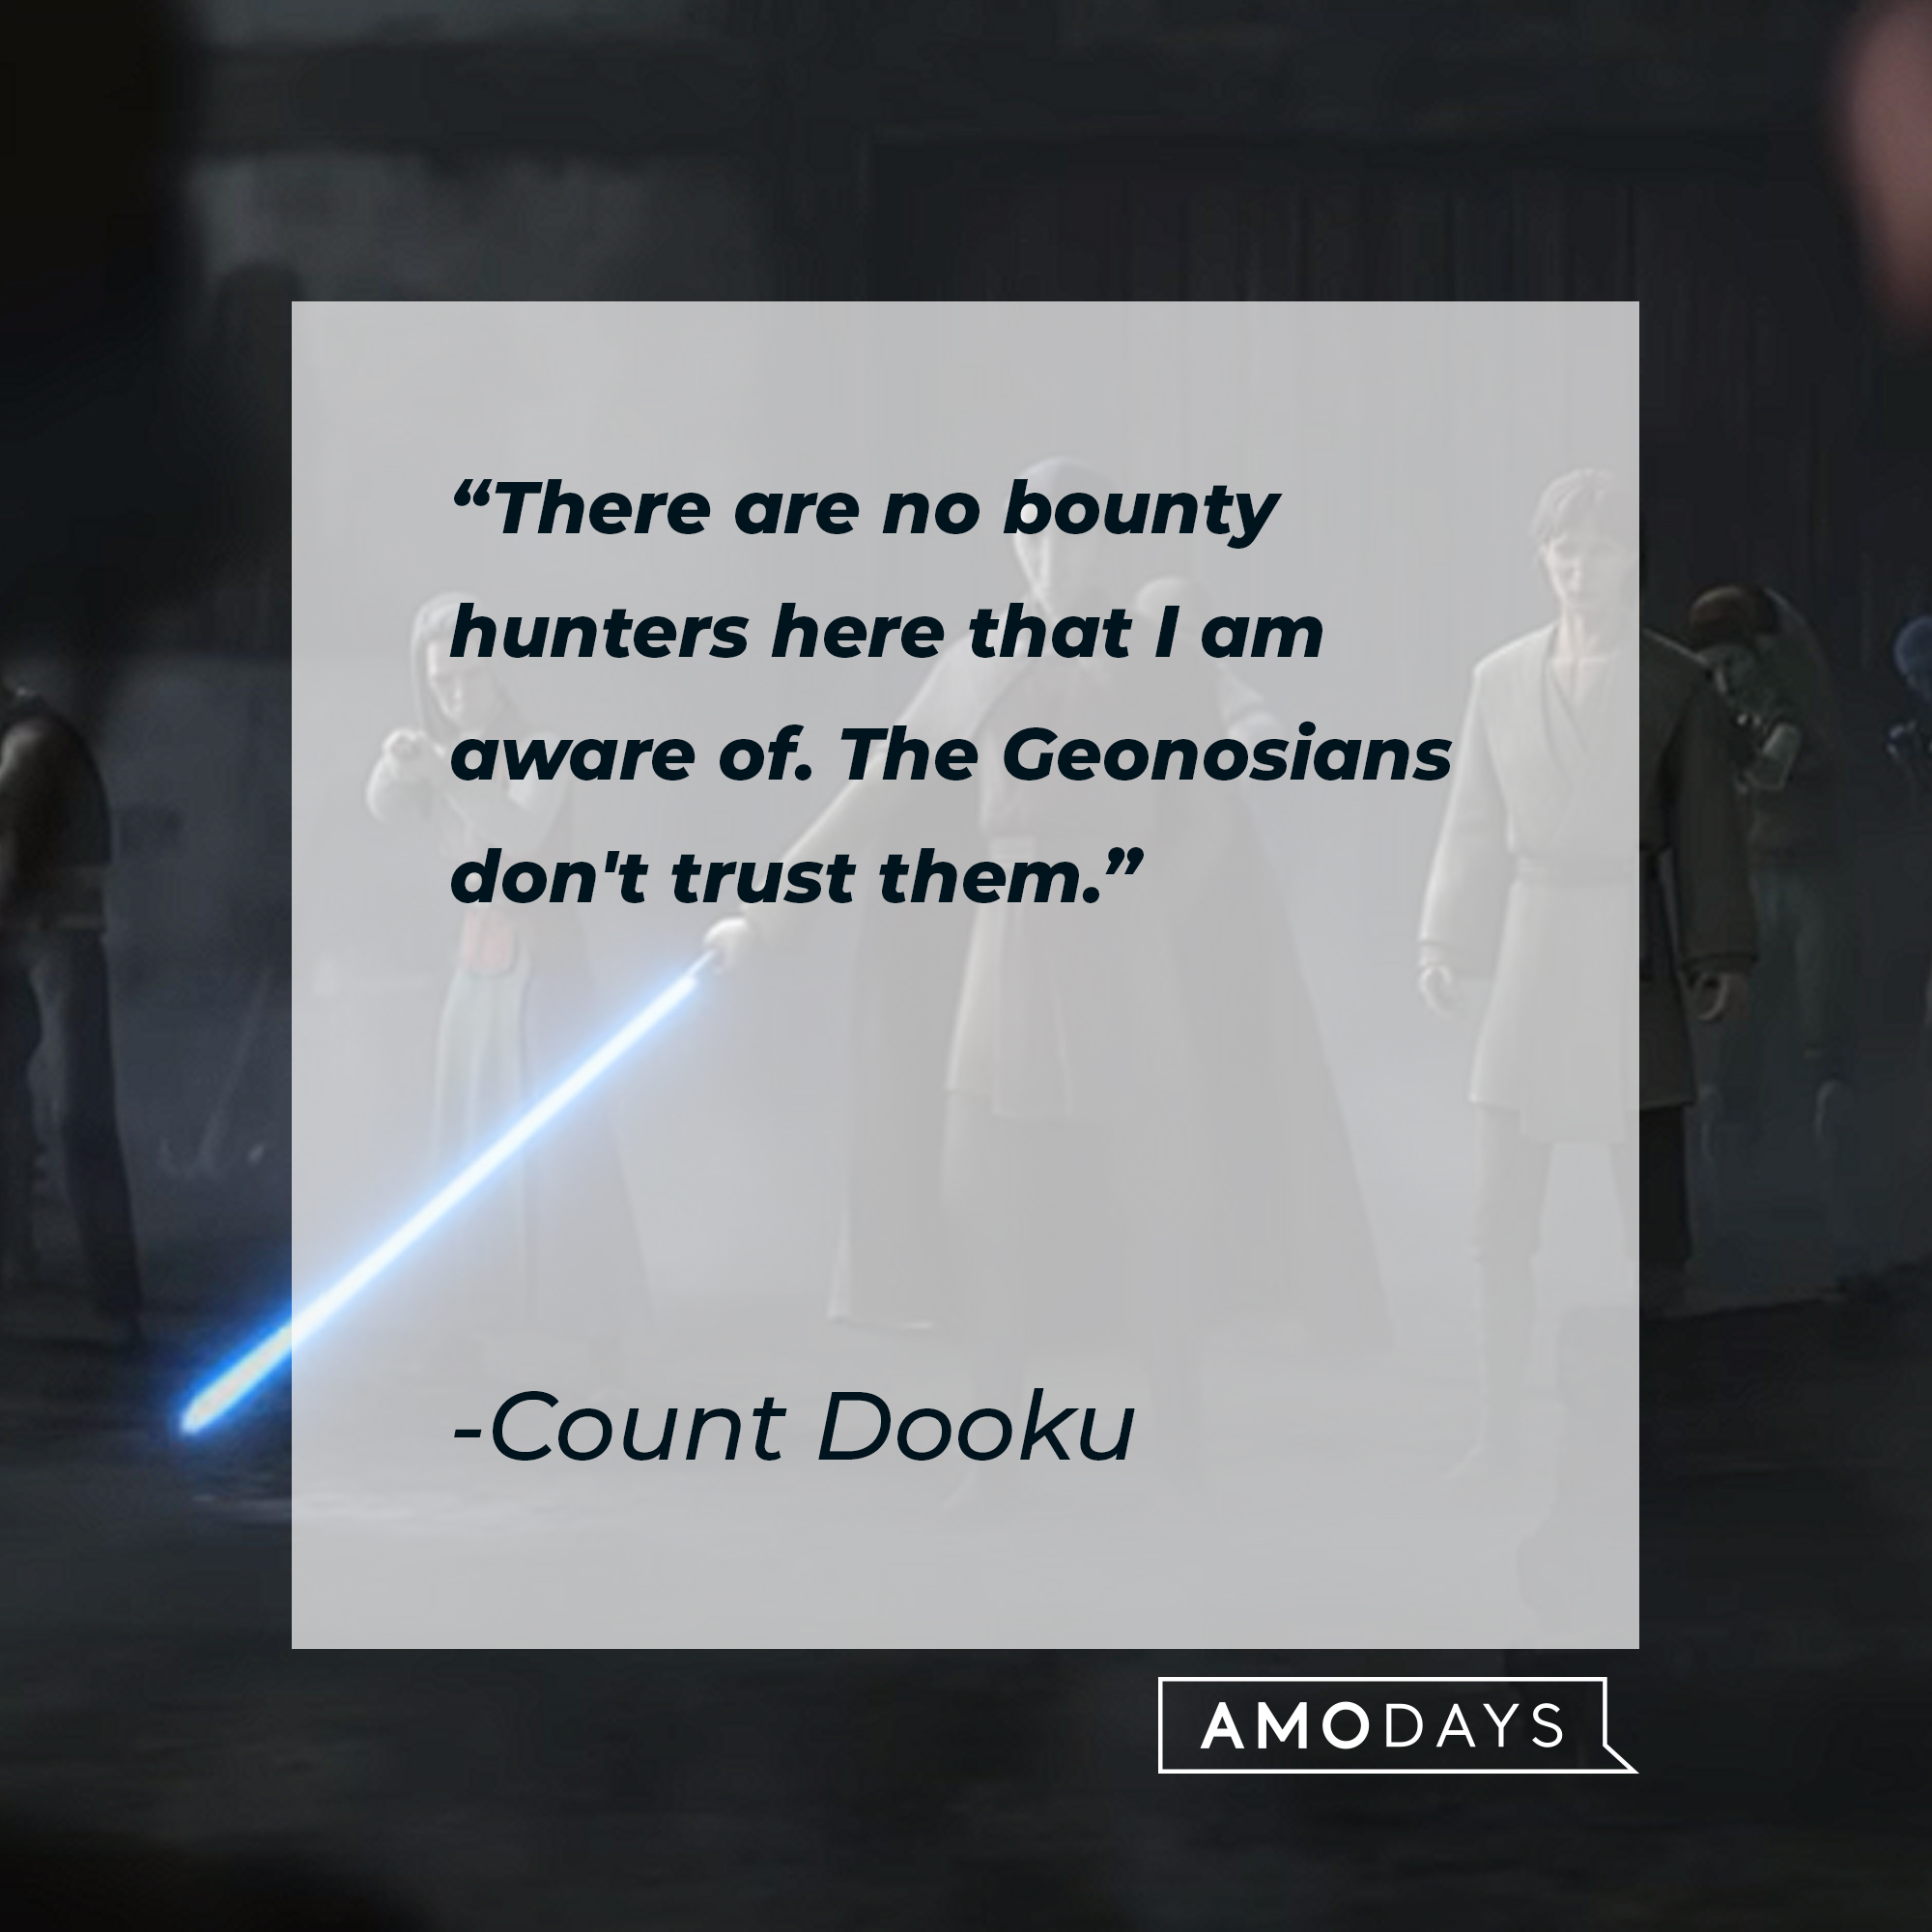 Count Dooku's quote: "There are no bounty hunters here that I am aware of. The Geonosians don't trust them." | Source: youtube.com/StarWars